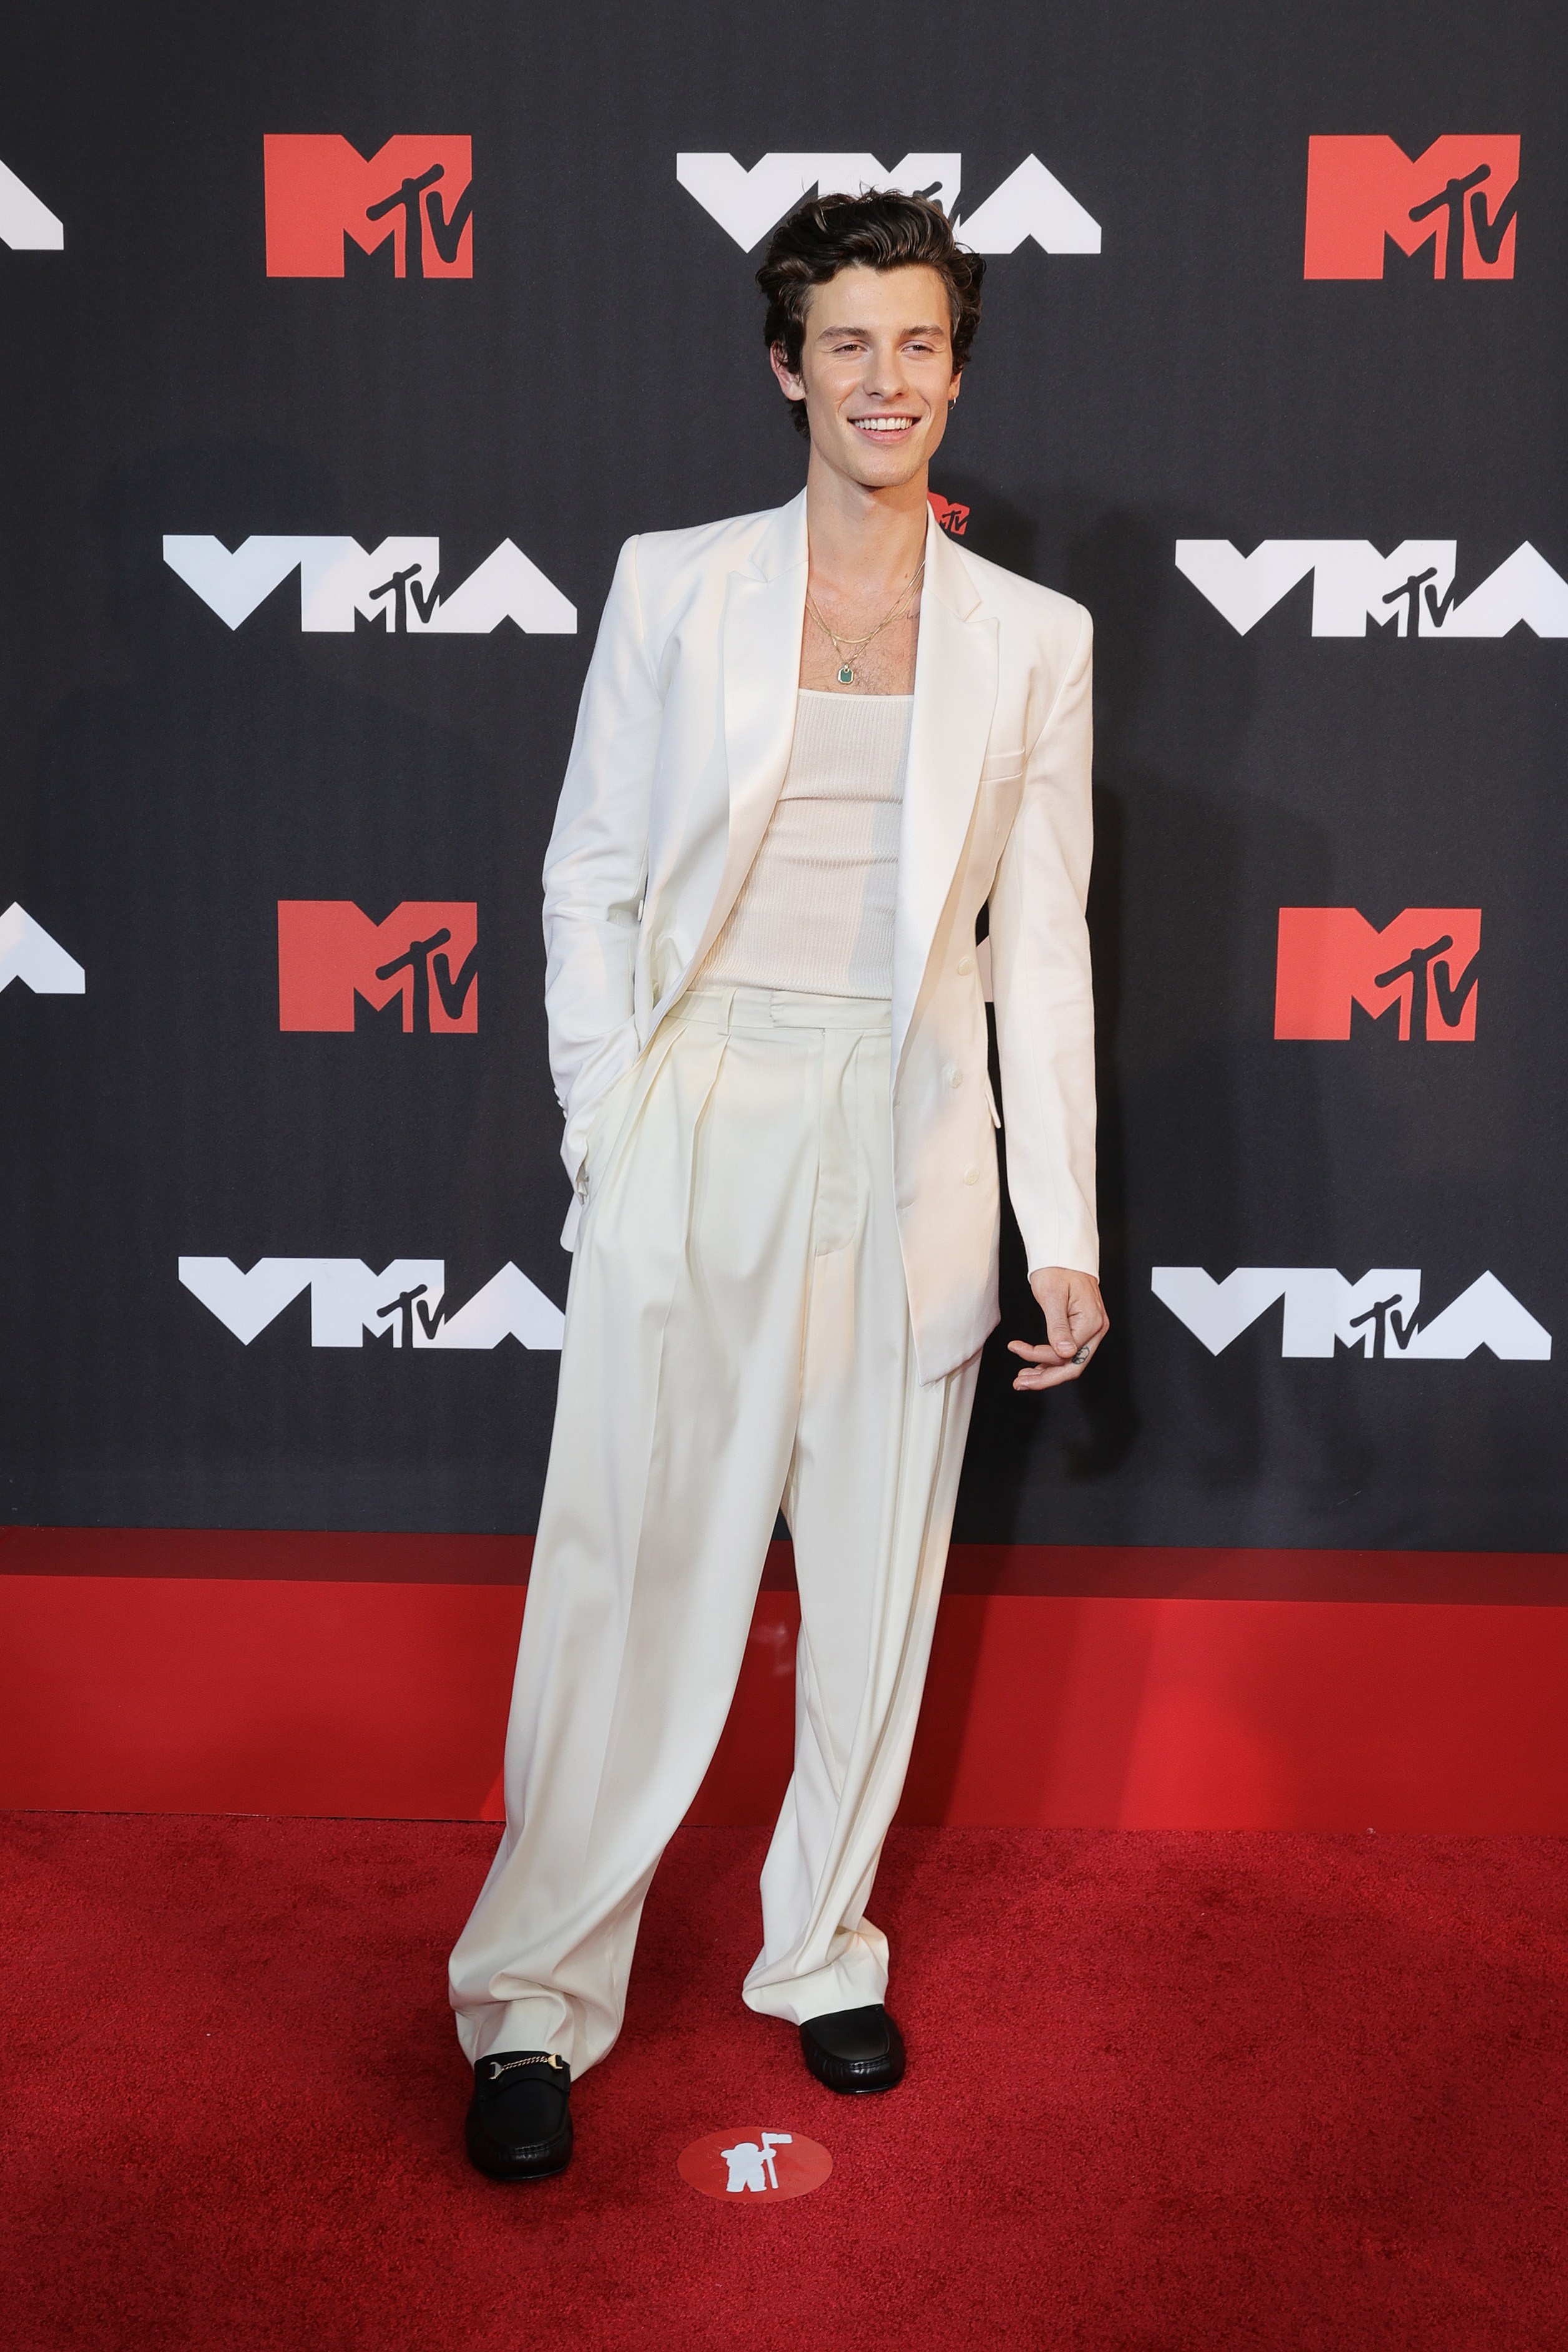 NEW YORK, NEW YORK - SEPTEMBER 12: Shawn Mendes attends the 2021 MTV Video Music Awards at Barclays Center on September 12, 2021 in the Brooklyn borough of New York City. (Photo by Jamie McCarthy/Getty Images for MTV/ ViacomCBS) (Foto: Getty Images for MTV/ViacomCBS)